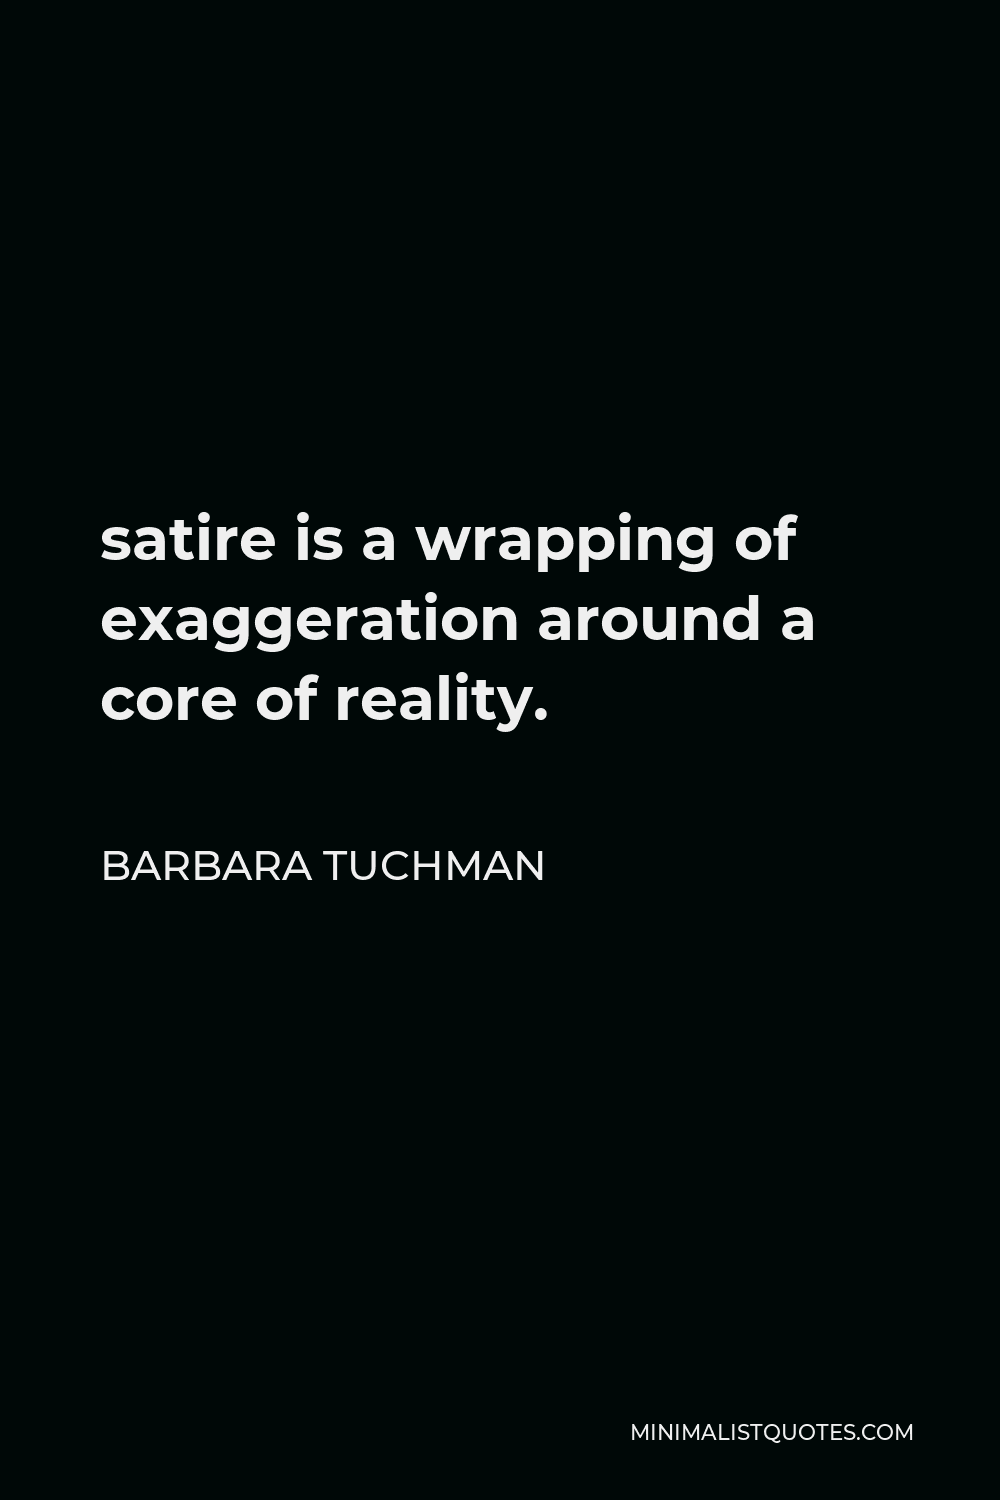 Barbara Tuchman Quote - satire is a wrapping of exaggeration around a core of reality.